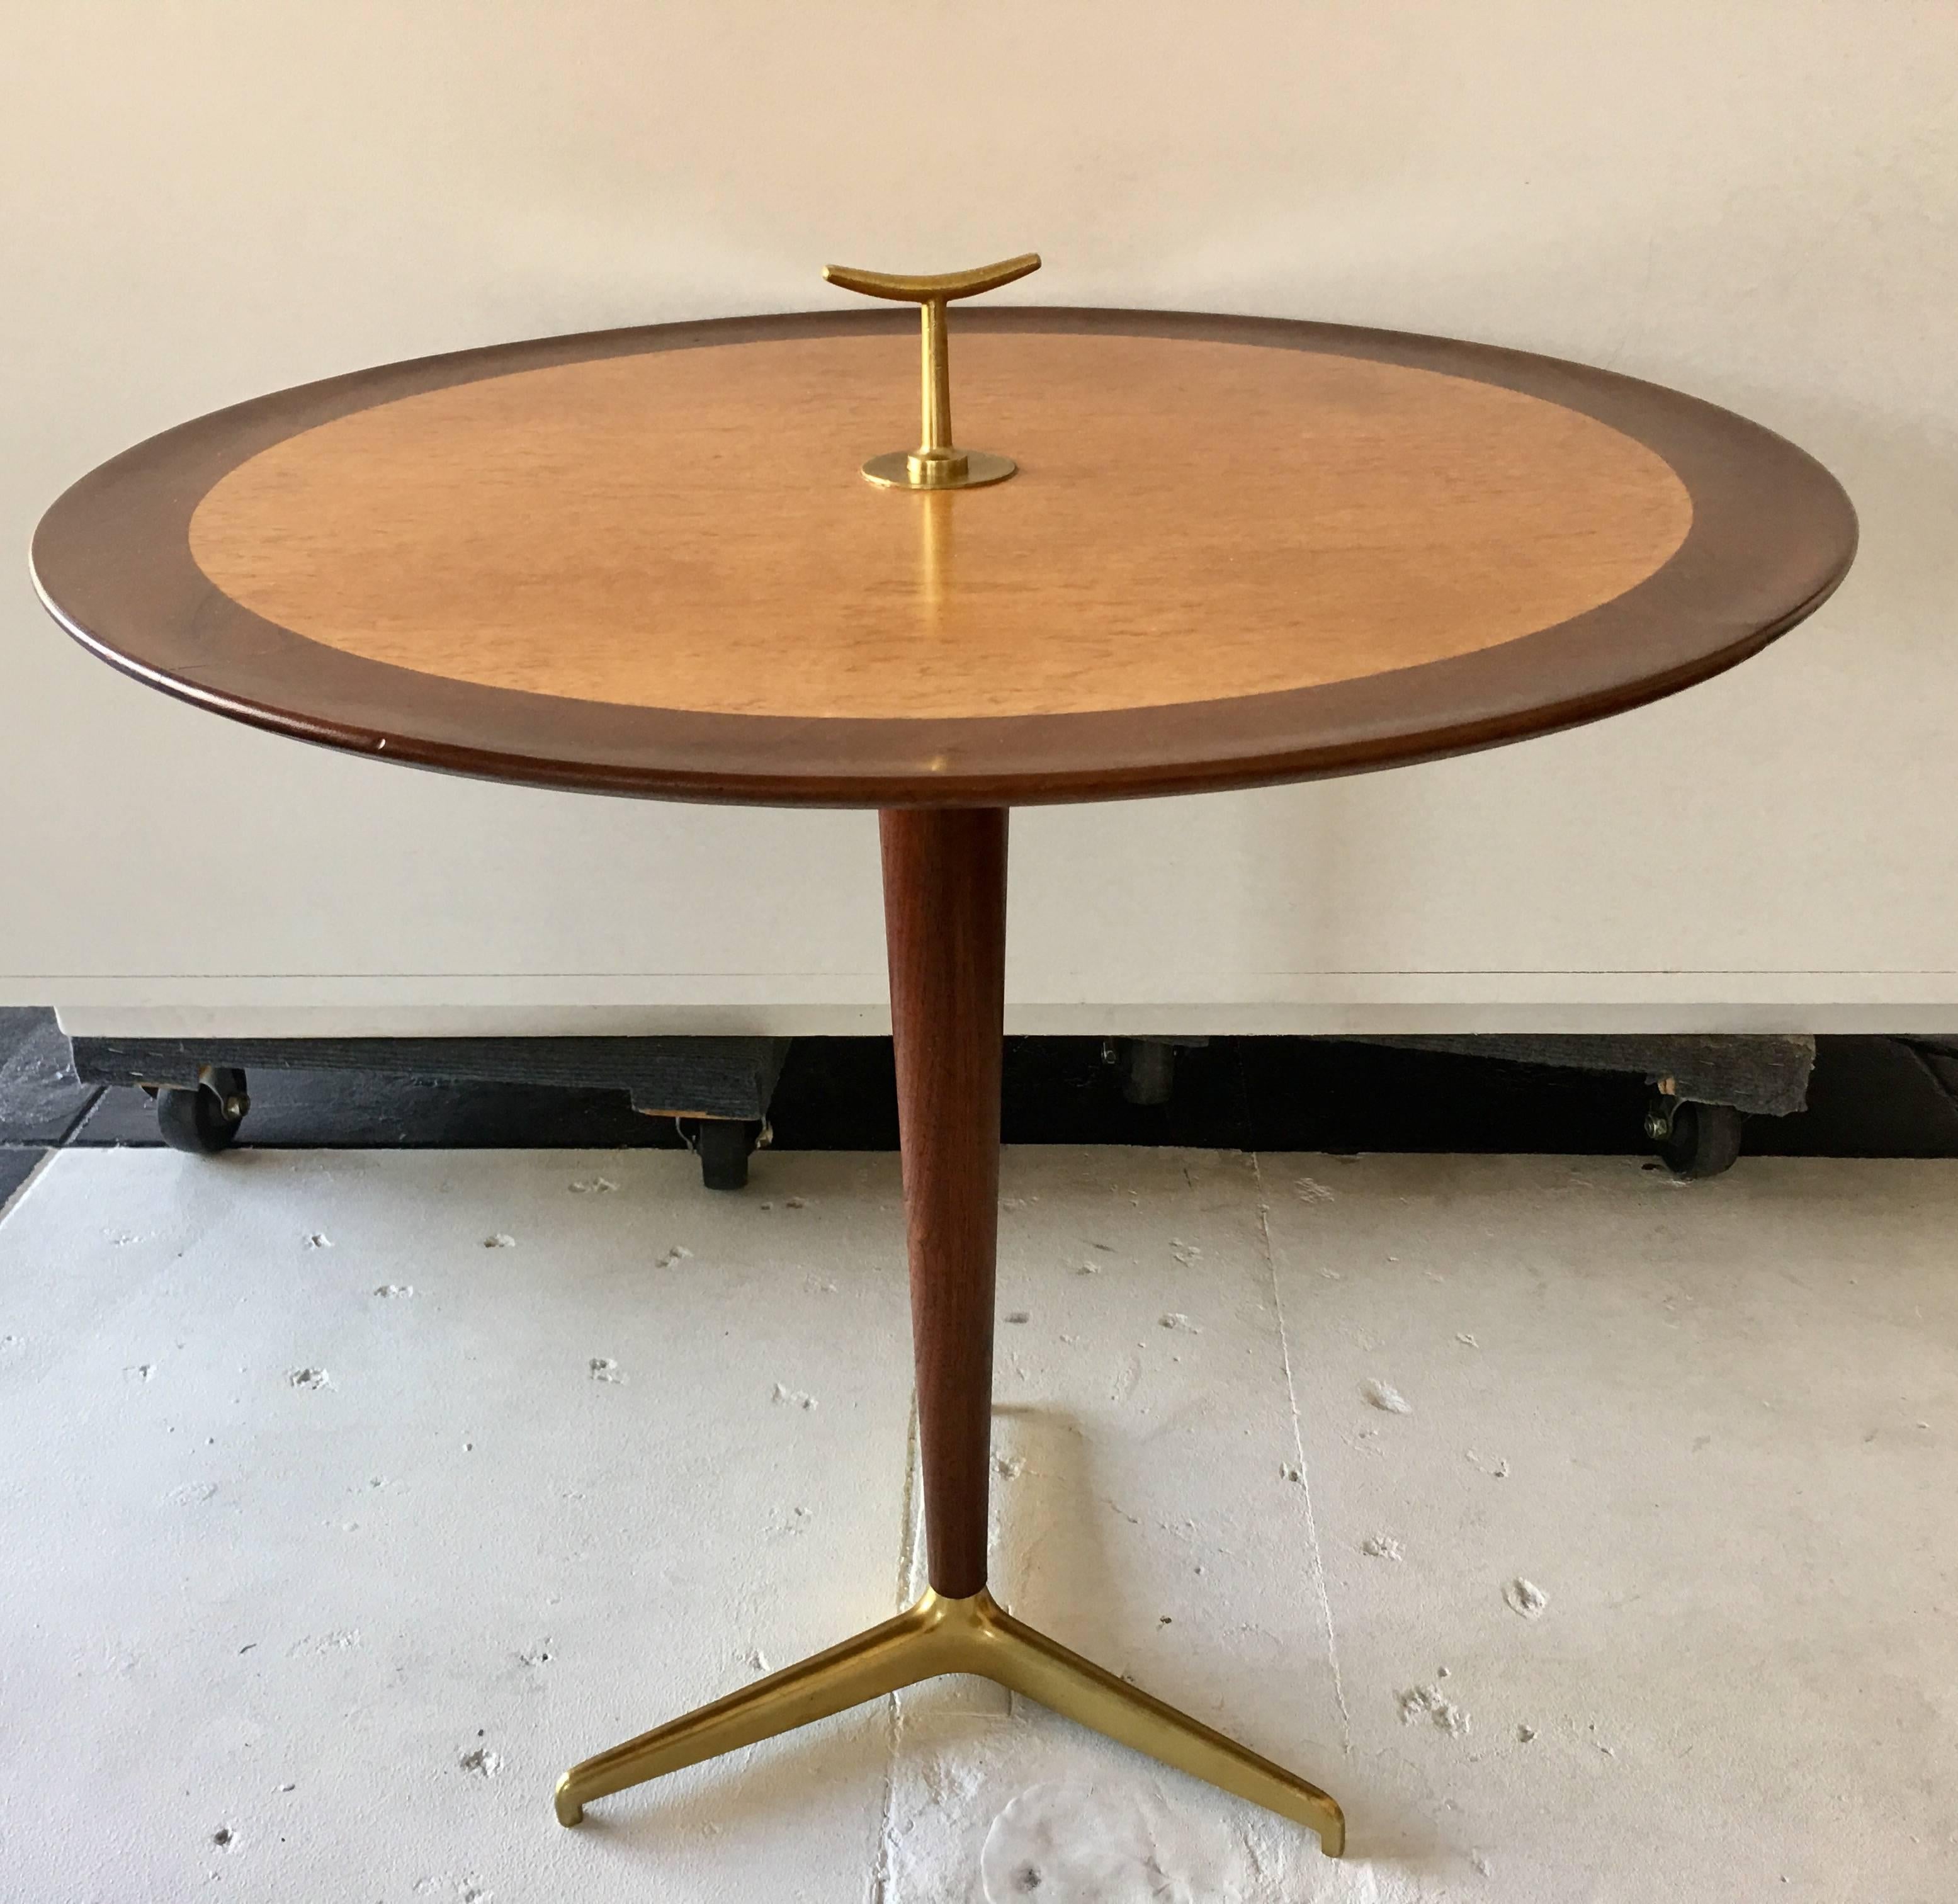 Edward Wormley snack and occasional table, model 4856. Signed with paper manufacturer's label to underside 'Made by Dunbar Furn’. Corporation Berne, Indiana. Signed with applied gold rectangular manufacturer's label to underside 'Dunbar Berne,